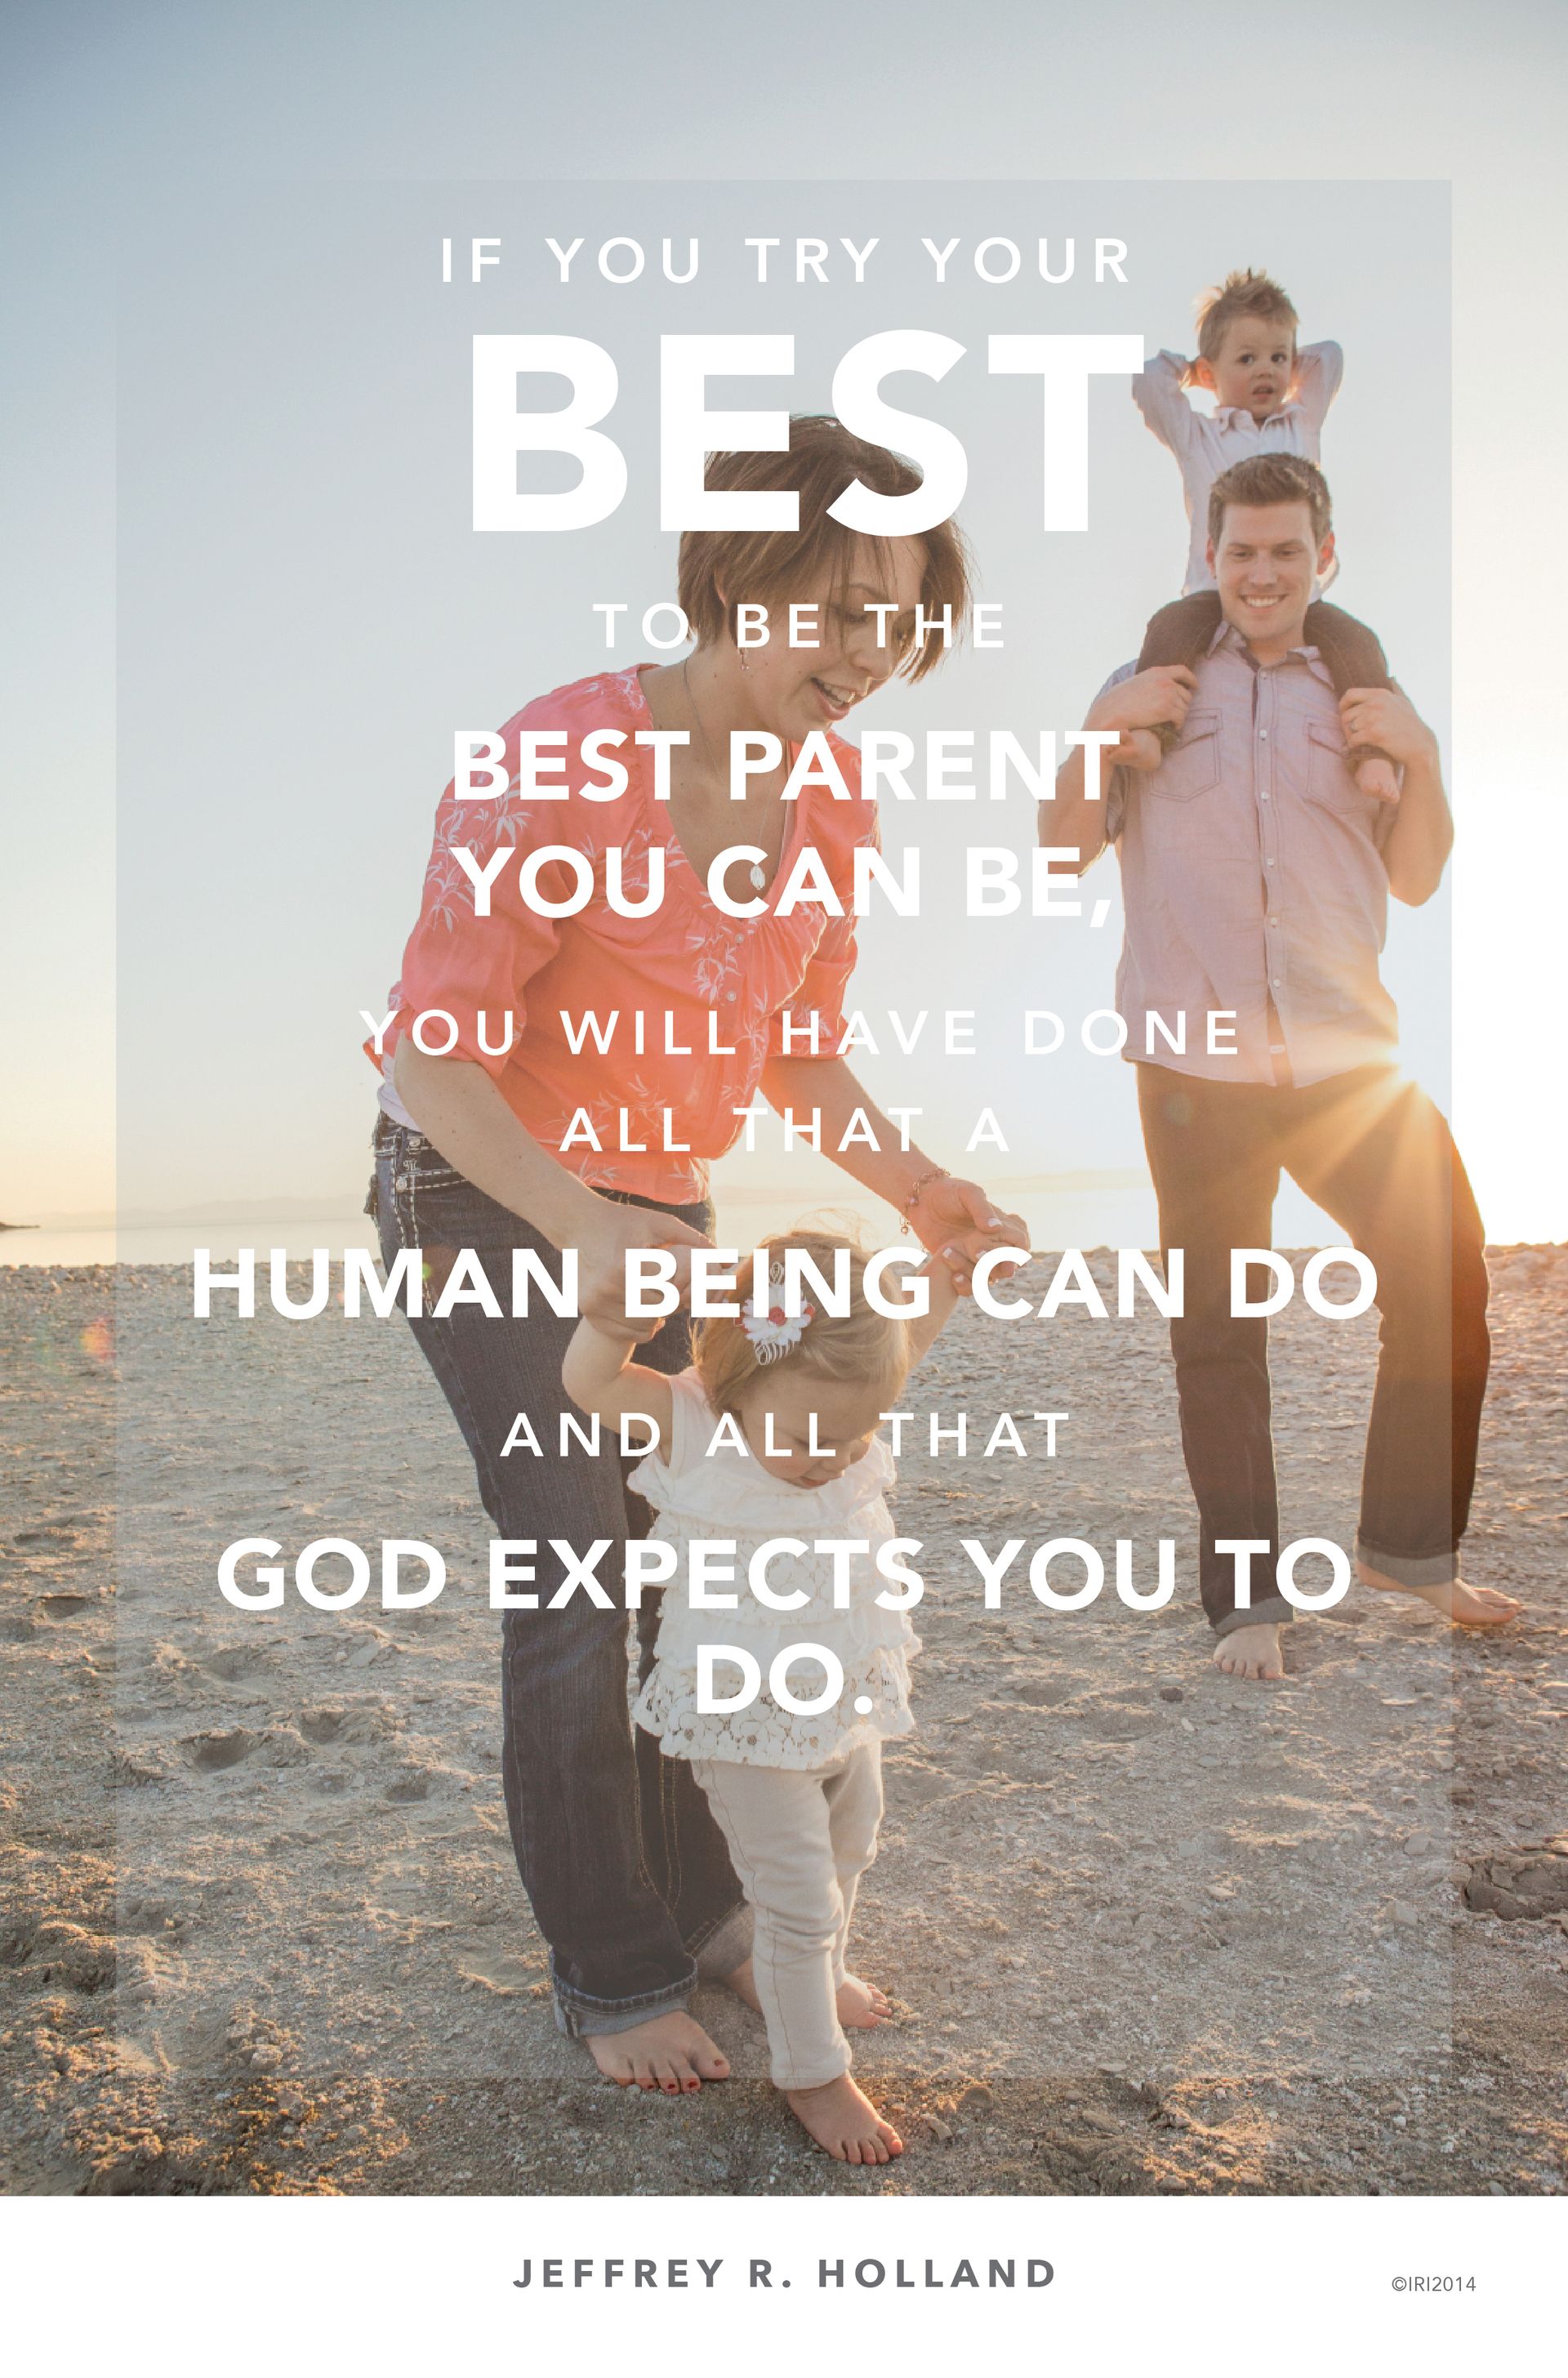 “If you try your best to be the best parent you can be, you will have done all that a human being can do and all that God expects you to do.”—Elder Jeffrey R. Holland, “Because She Is a Mother”